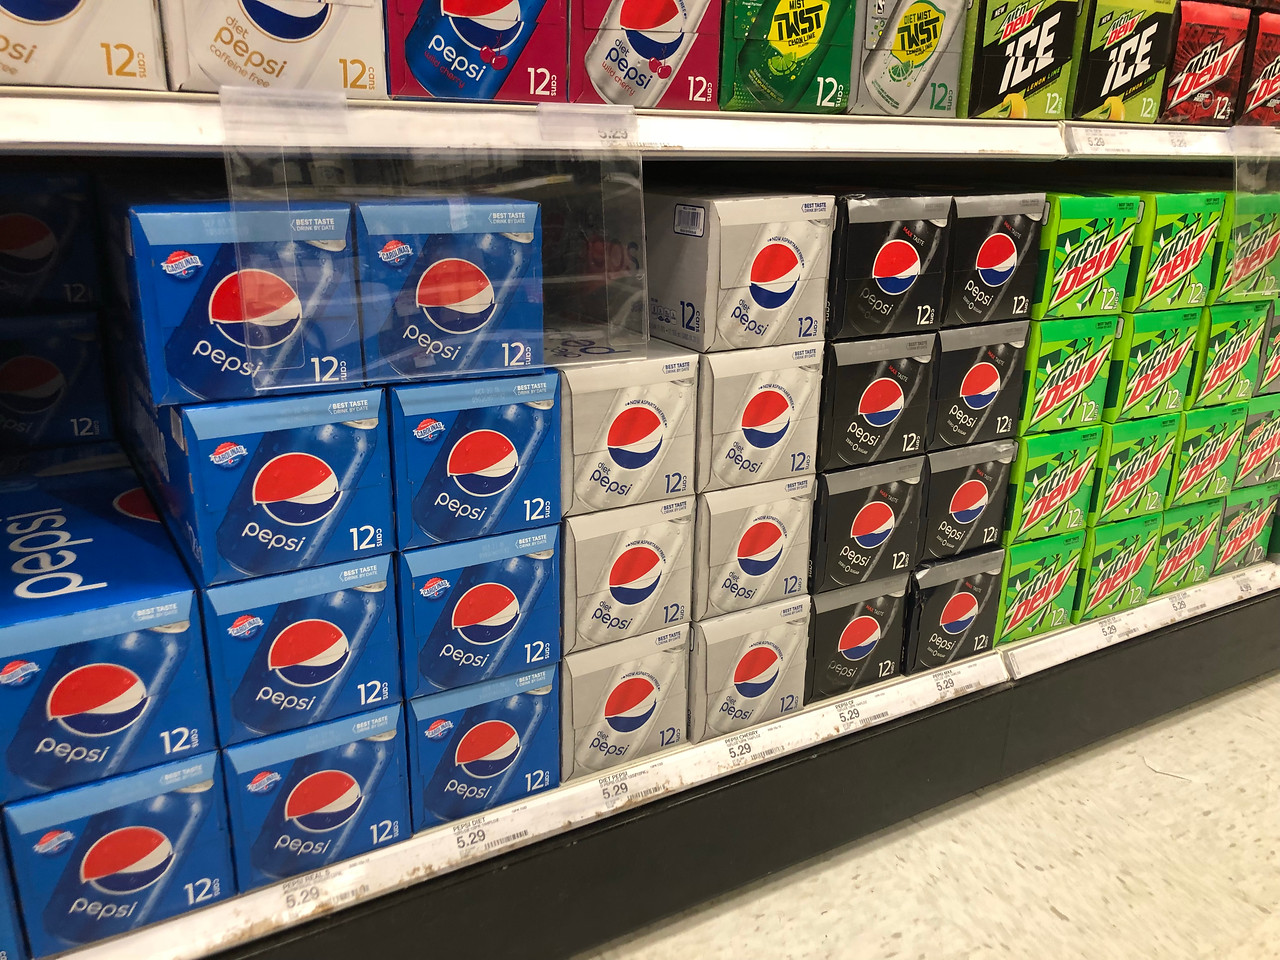 pepsi, diet pepsi and mountain dew stacked on shelves in store